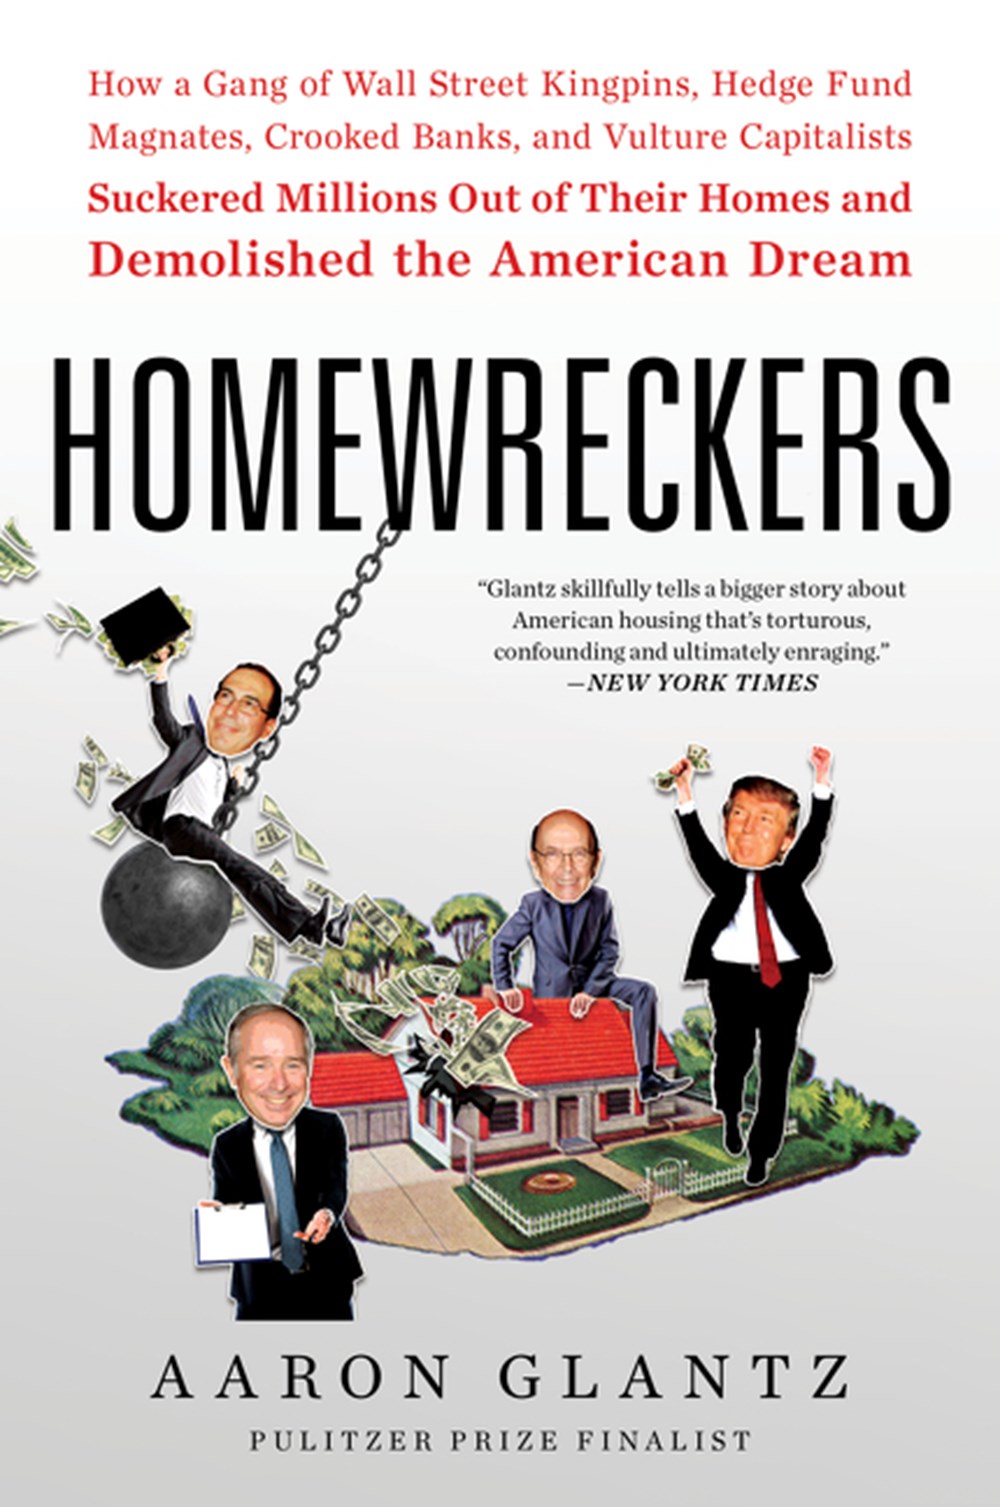 Homewreckers: How a Gang of Wall Street Kingpins, Hedge Fund Magnates, Crooked Banks, and Vulture Ca